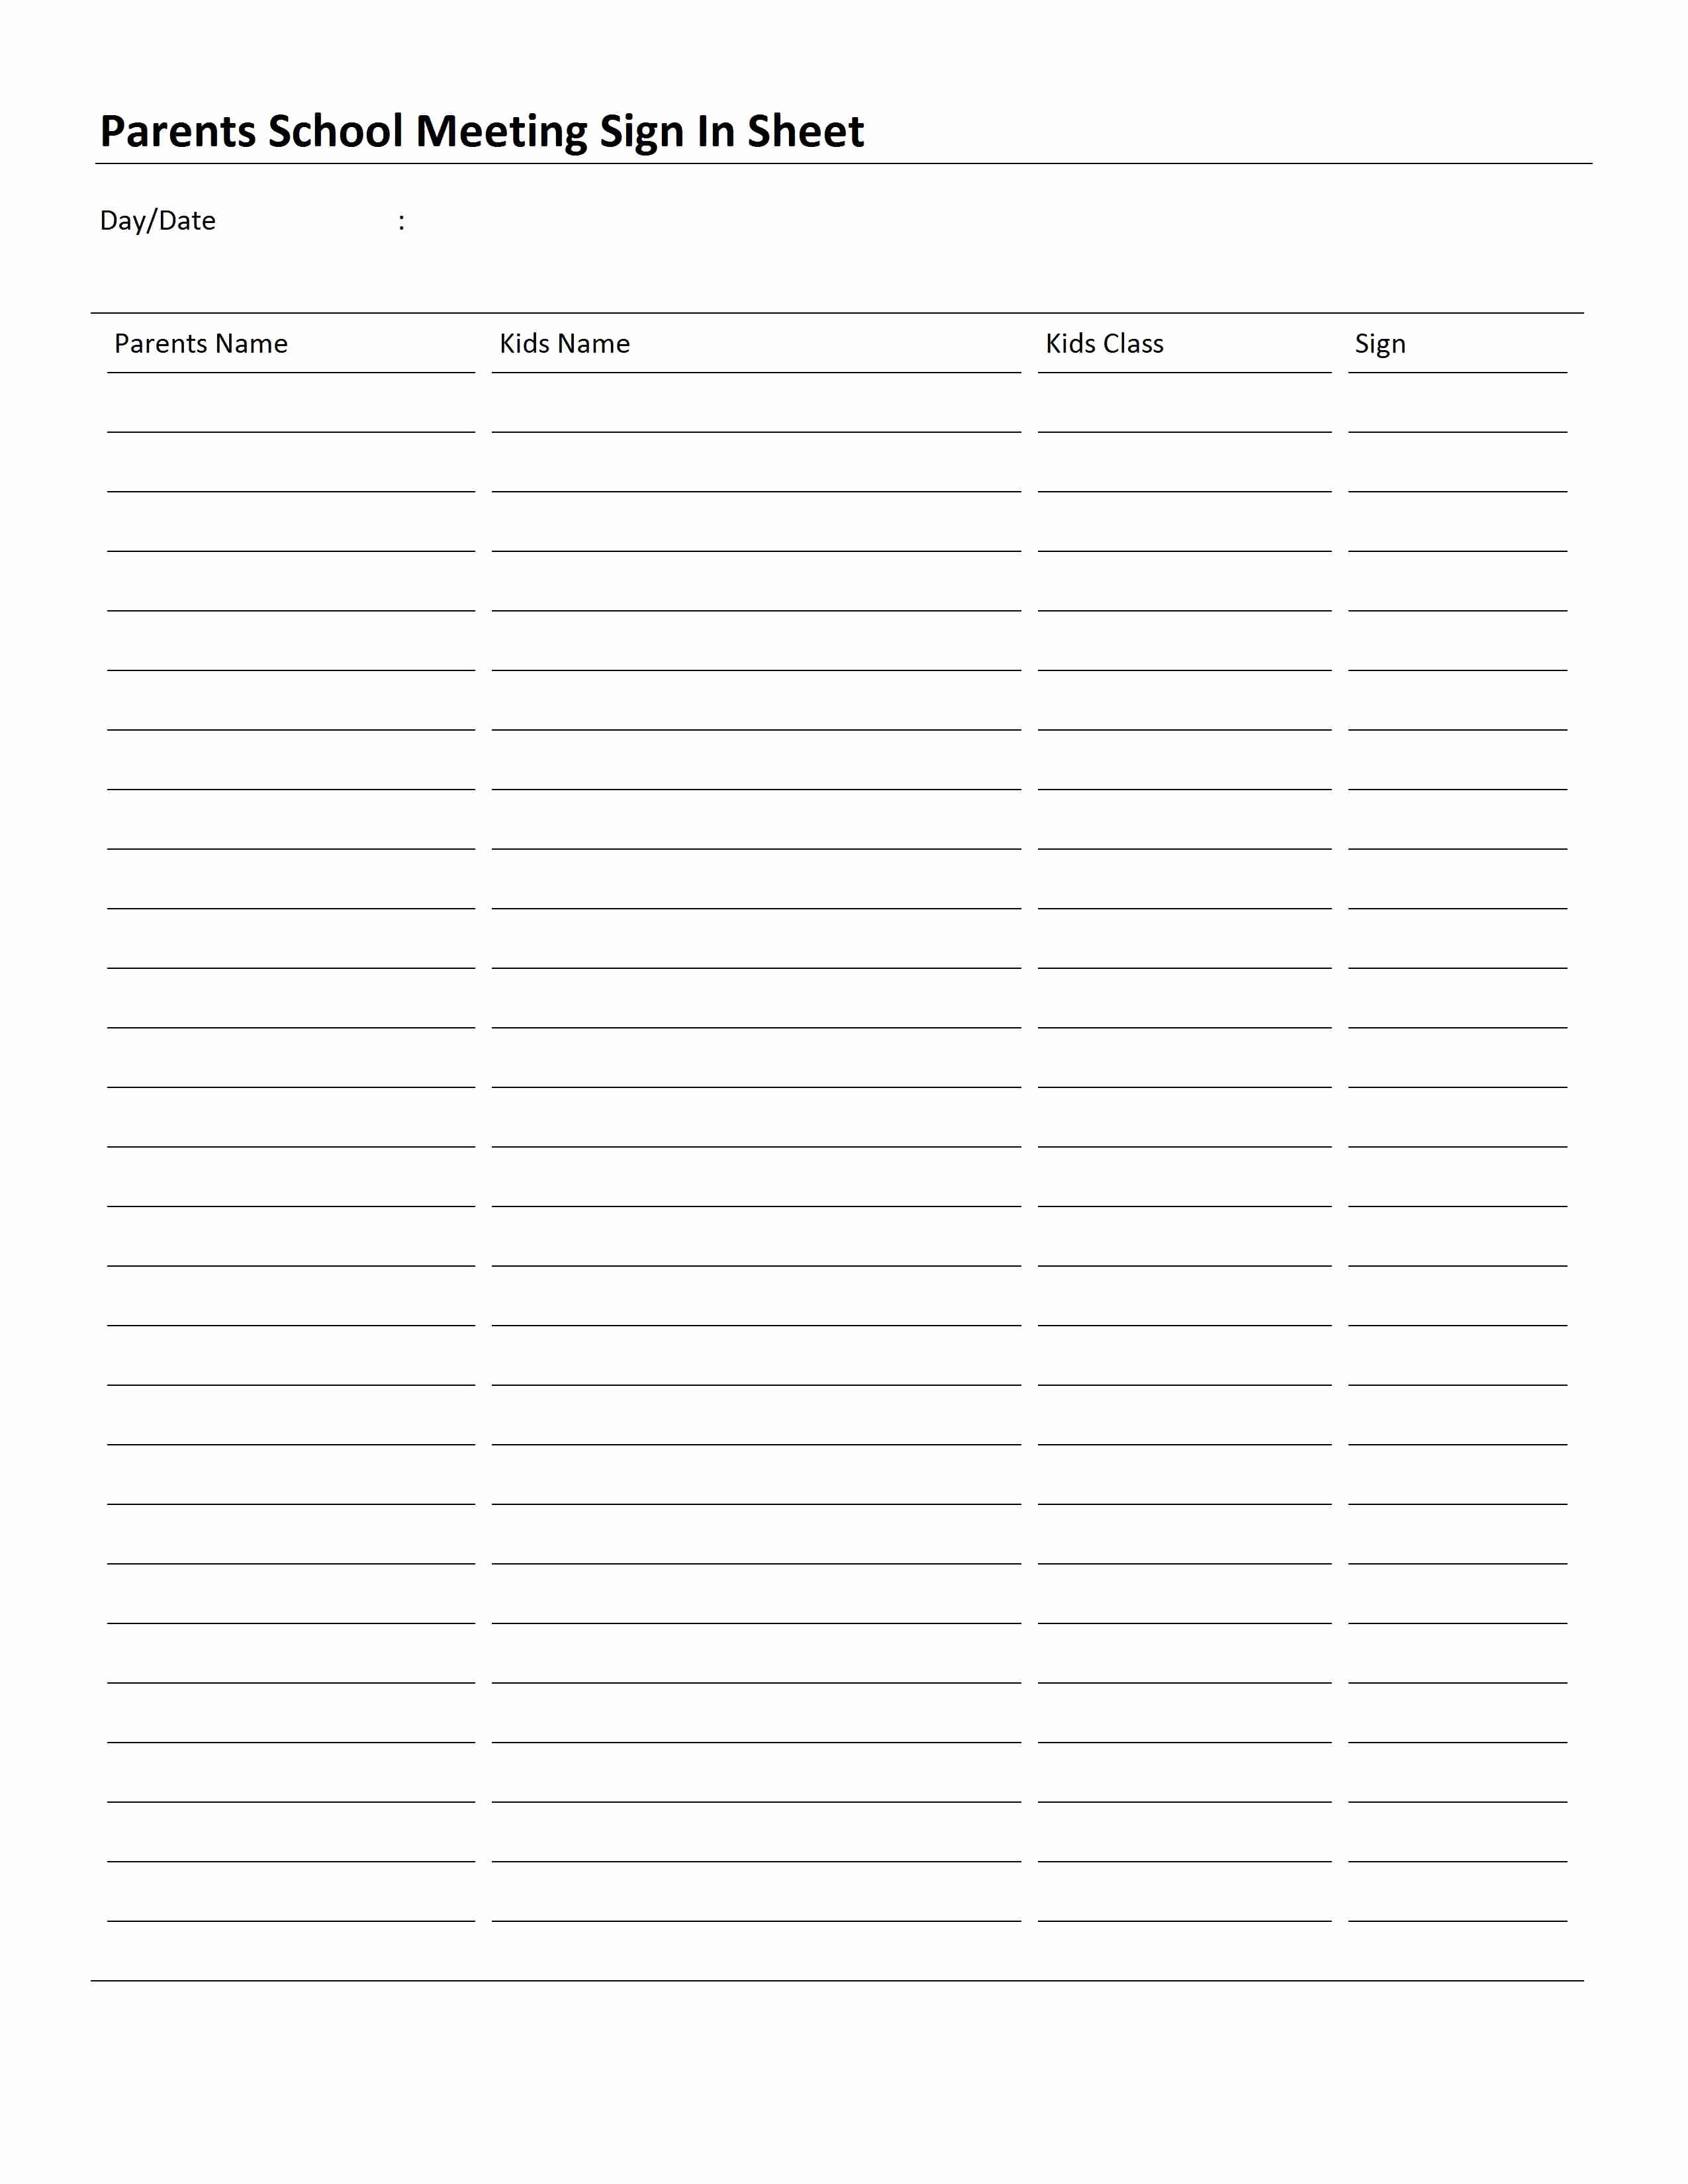 Event Sign In Sheet Template New Parents School Meeting Sign In Sheet